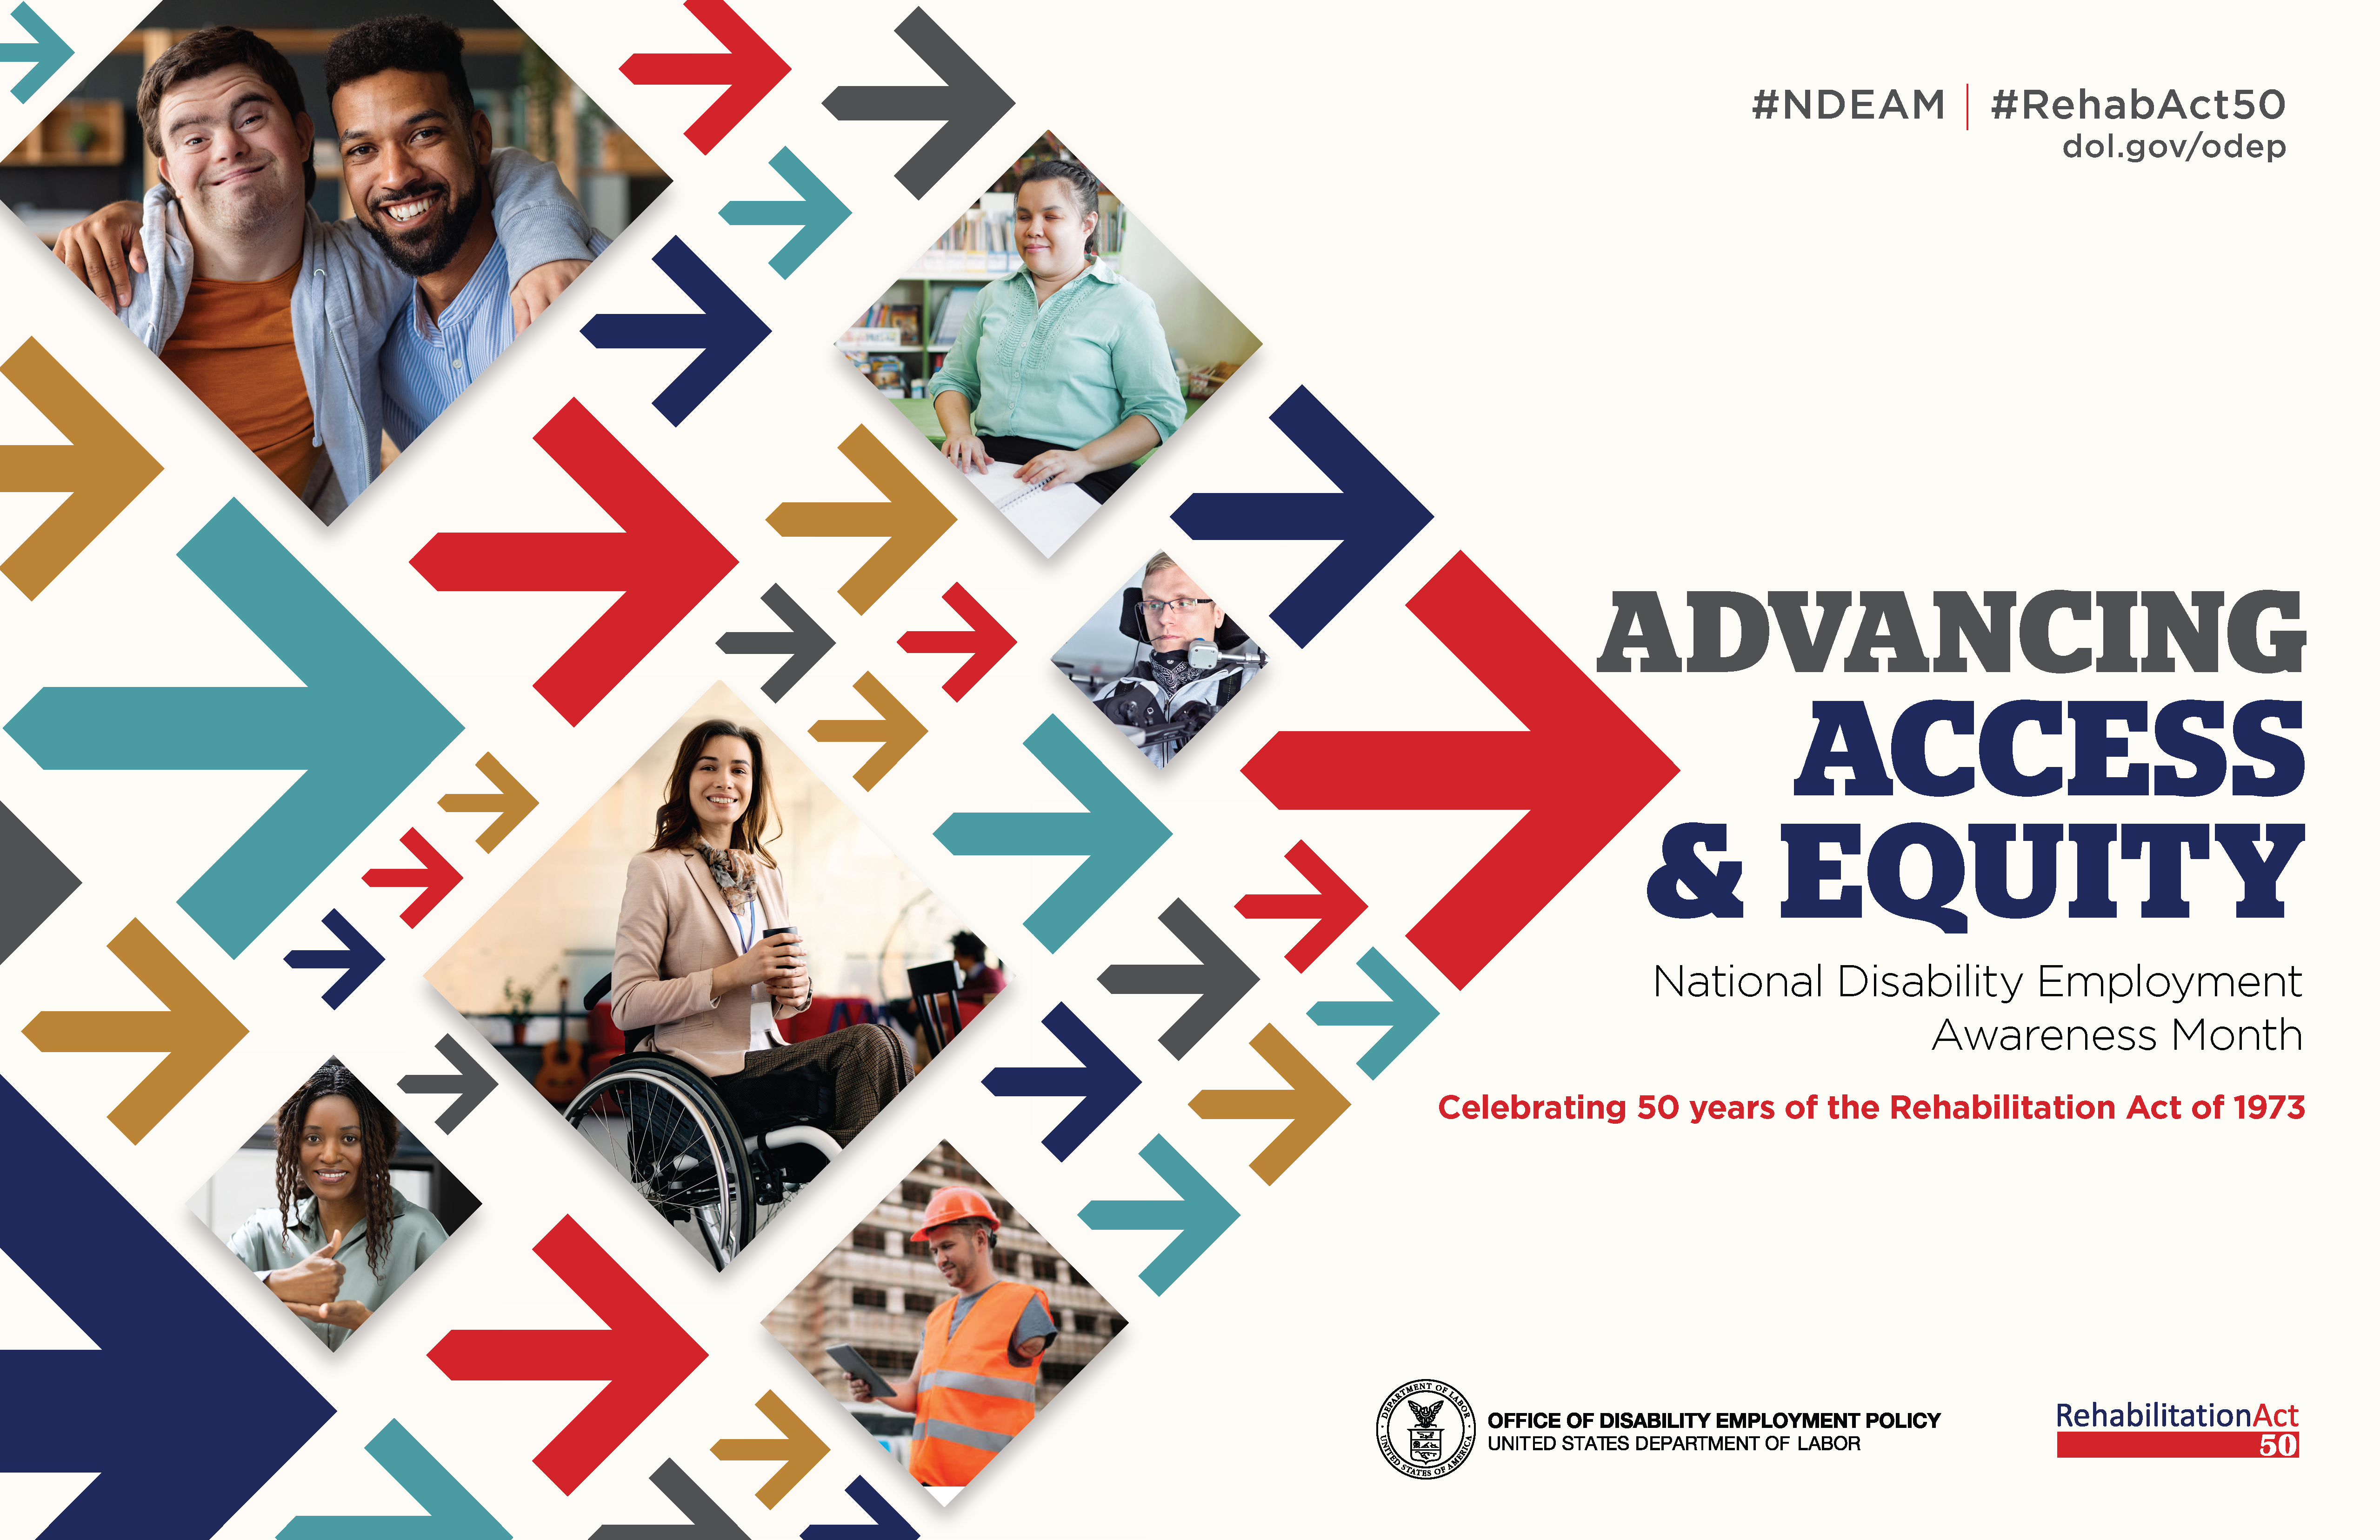 The poster is rectangular in shape with a white background. The words, “Advancing Access & Equity, National Disability Employment Awareness Month, Celebrating 50 years of the Rehabilitation Act of 1973” are placed to the right of a field of red, gray, teal, blue and yellow arrows. Mixed within the arrows are diverse images of people with disabilities in workplace settings. Along the top in small gray letters are the hashtags “NDEAM” and “RehabAct50” followed by the website address, dol.gov/ODEP. In the lower right corner is the DOL seal followed by the words “Office of Disability Employment Policy, United States Department of Labor” as well as the Rehabilitation Act 50 logo.